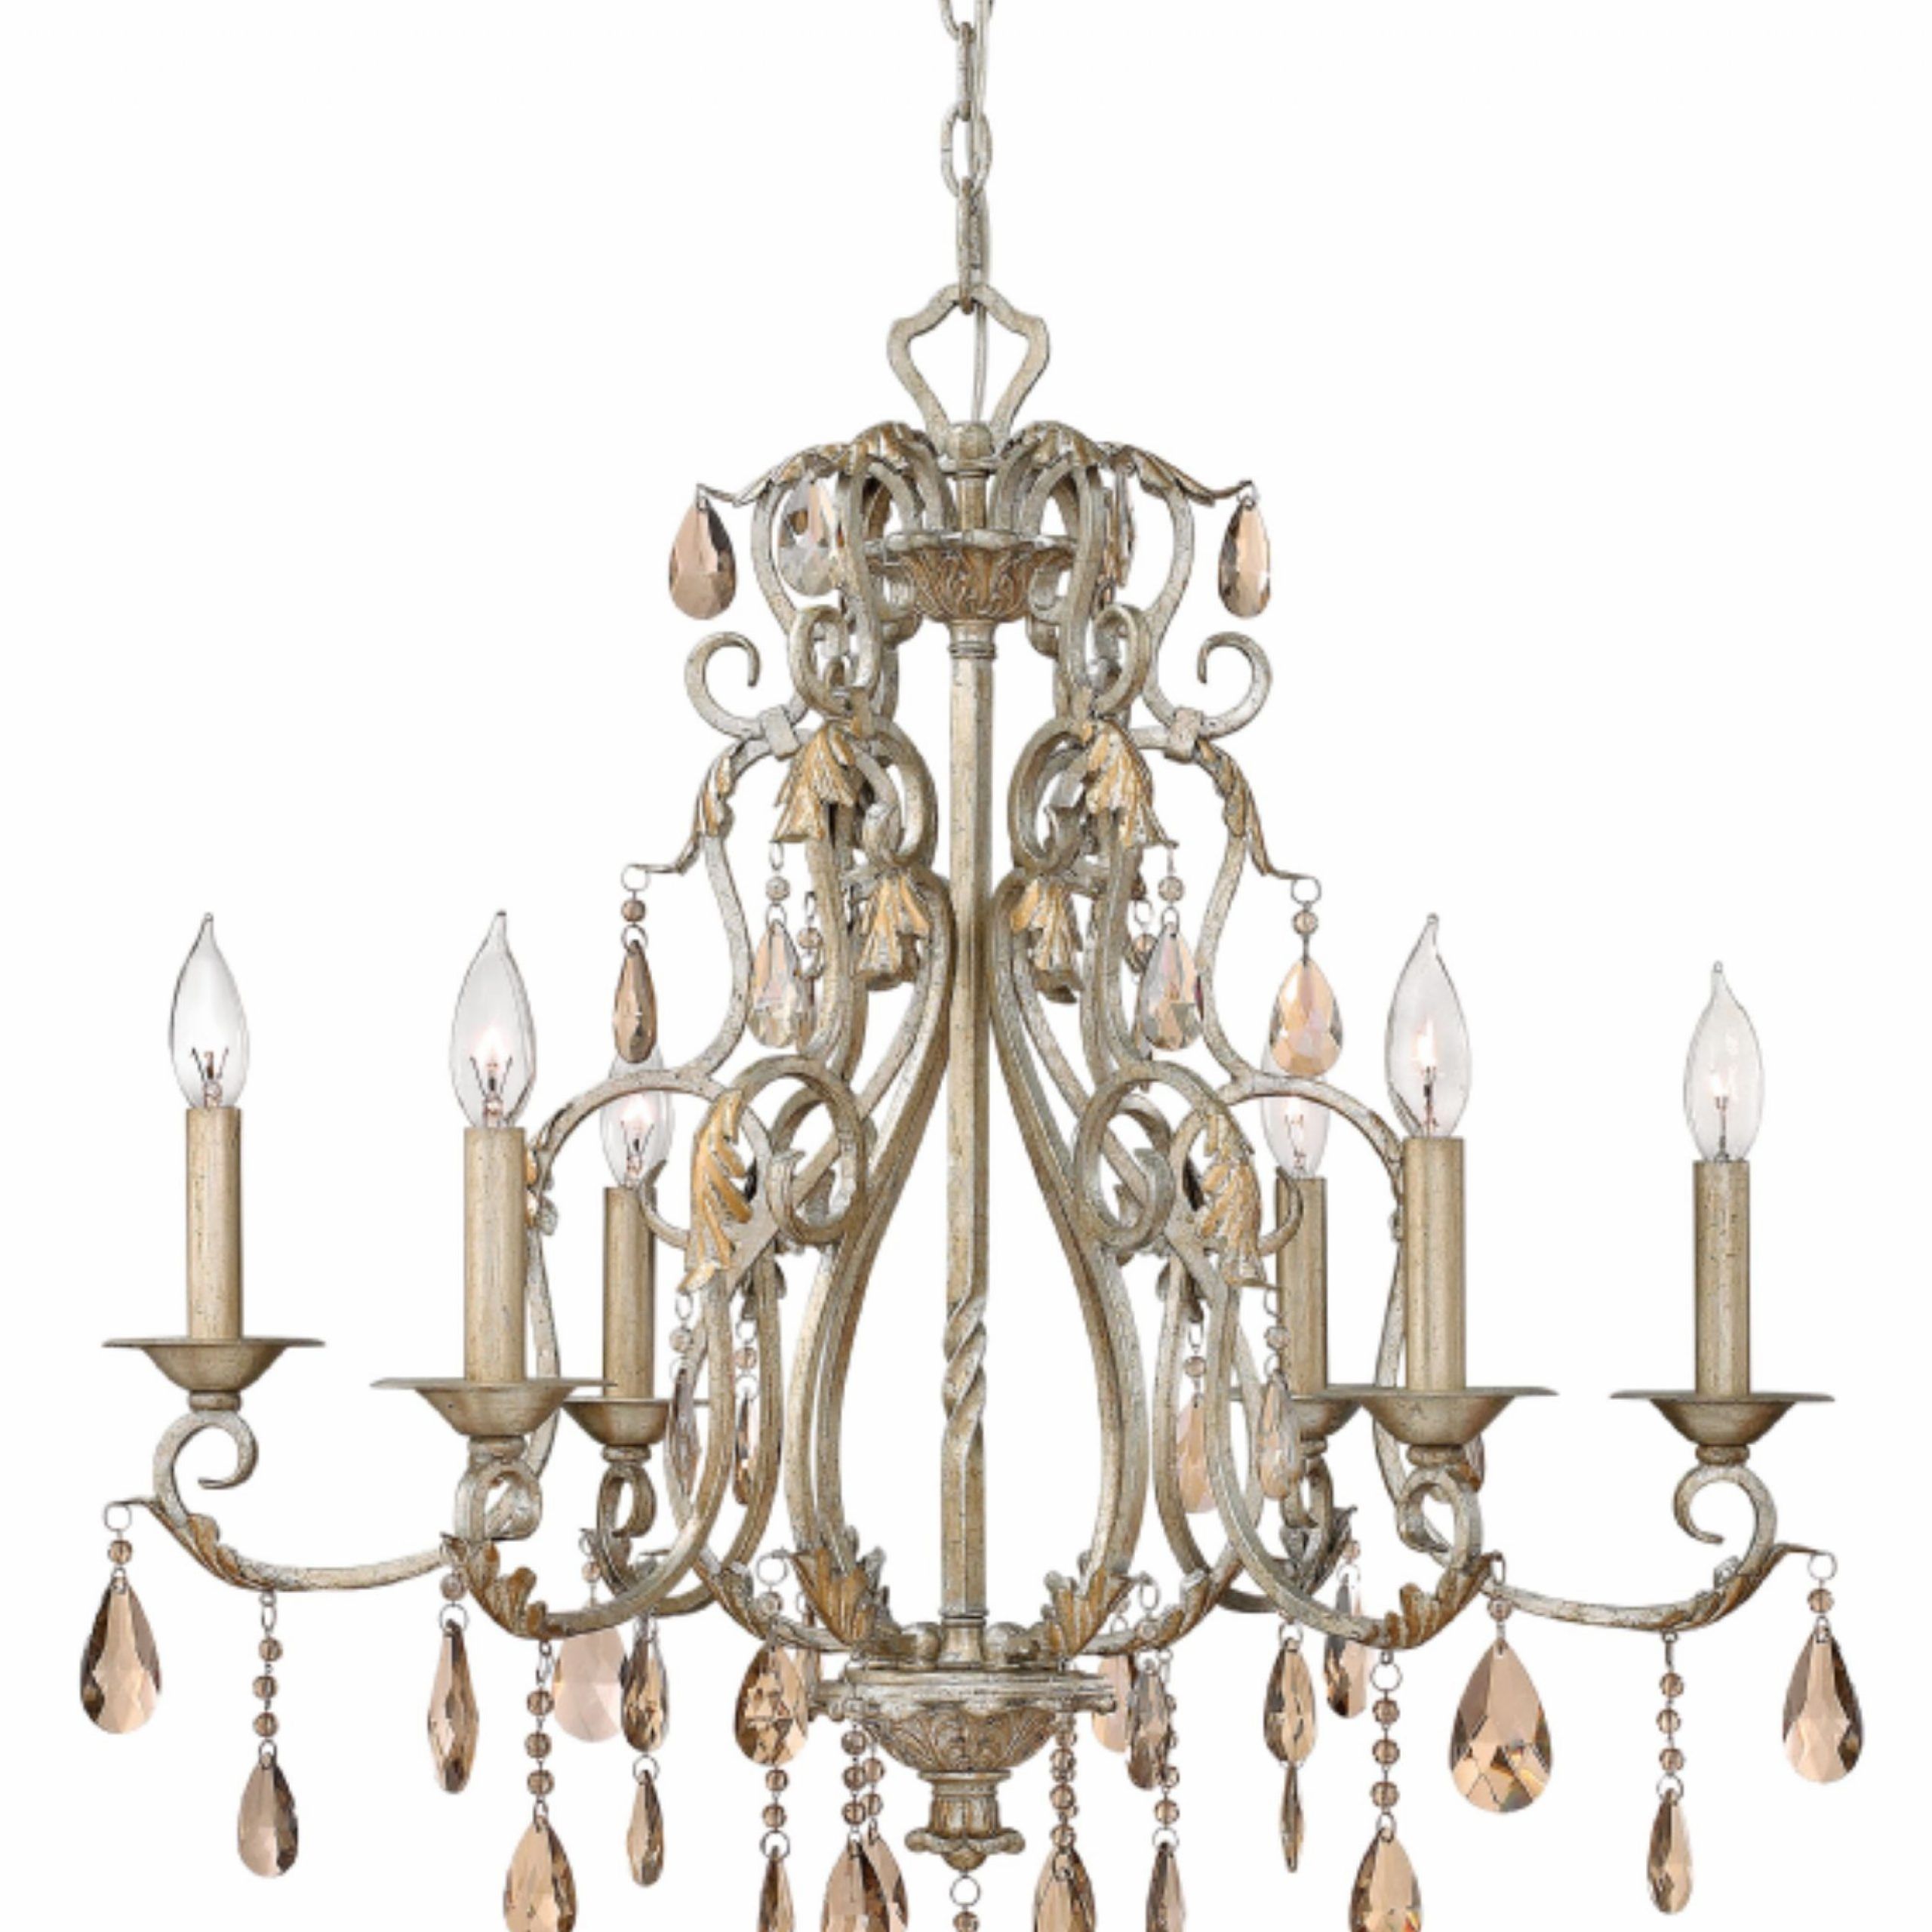 Hinkley Lighting Carries Many Silver Leaf Carlton Pertaining To Silver Leaf Chandeliers (View 2 of 15)